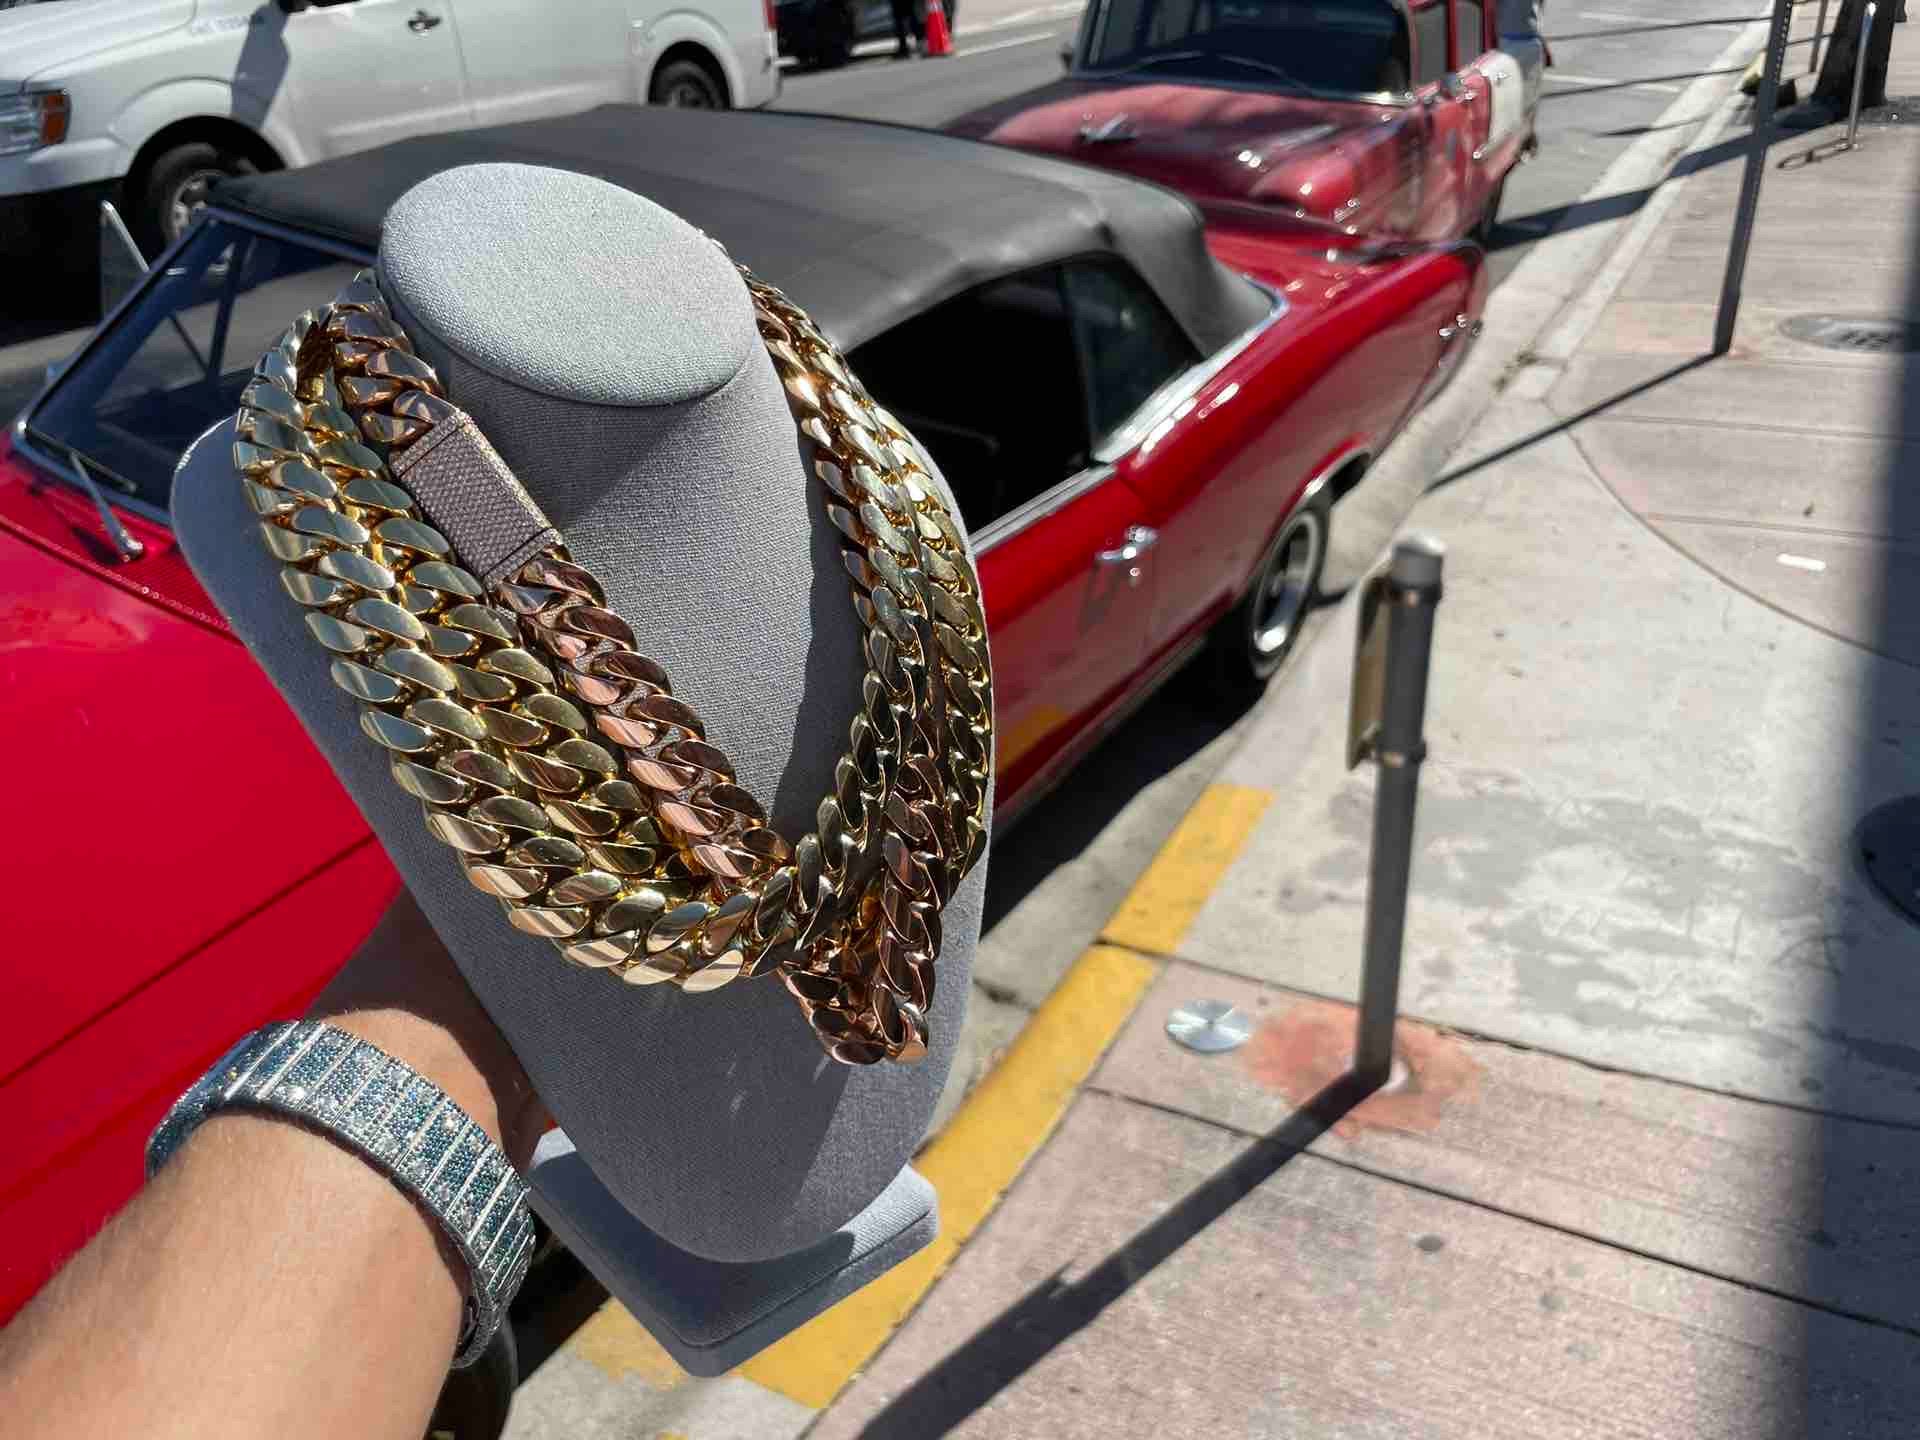 heavy cuban link at renee de paris jewelry on miami beach in front of an old school